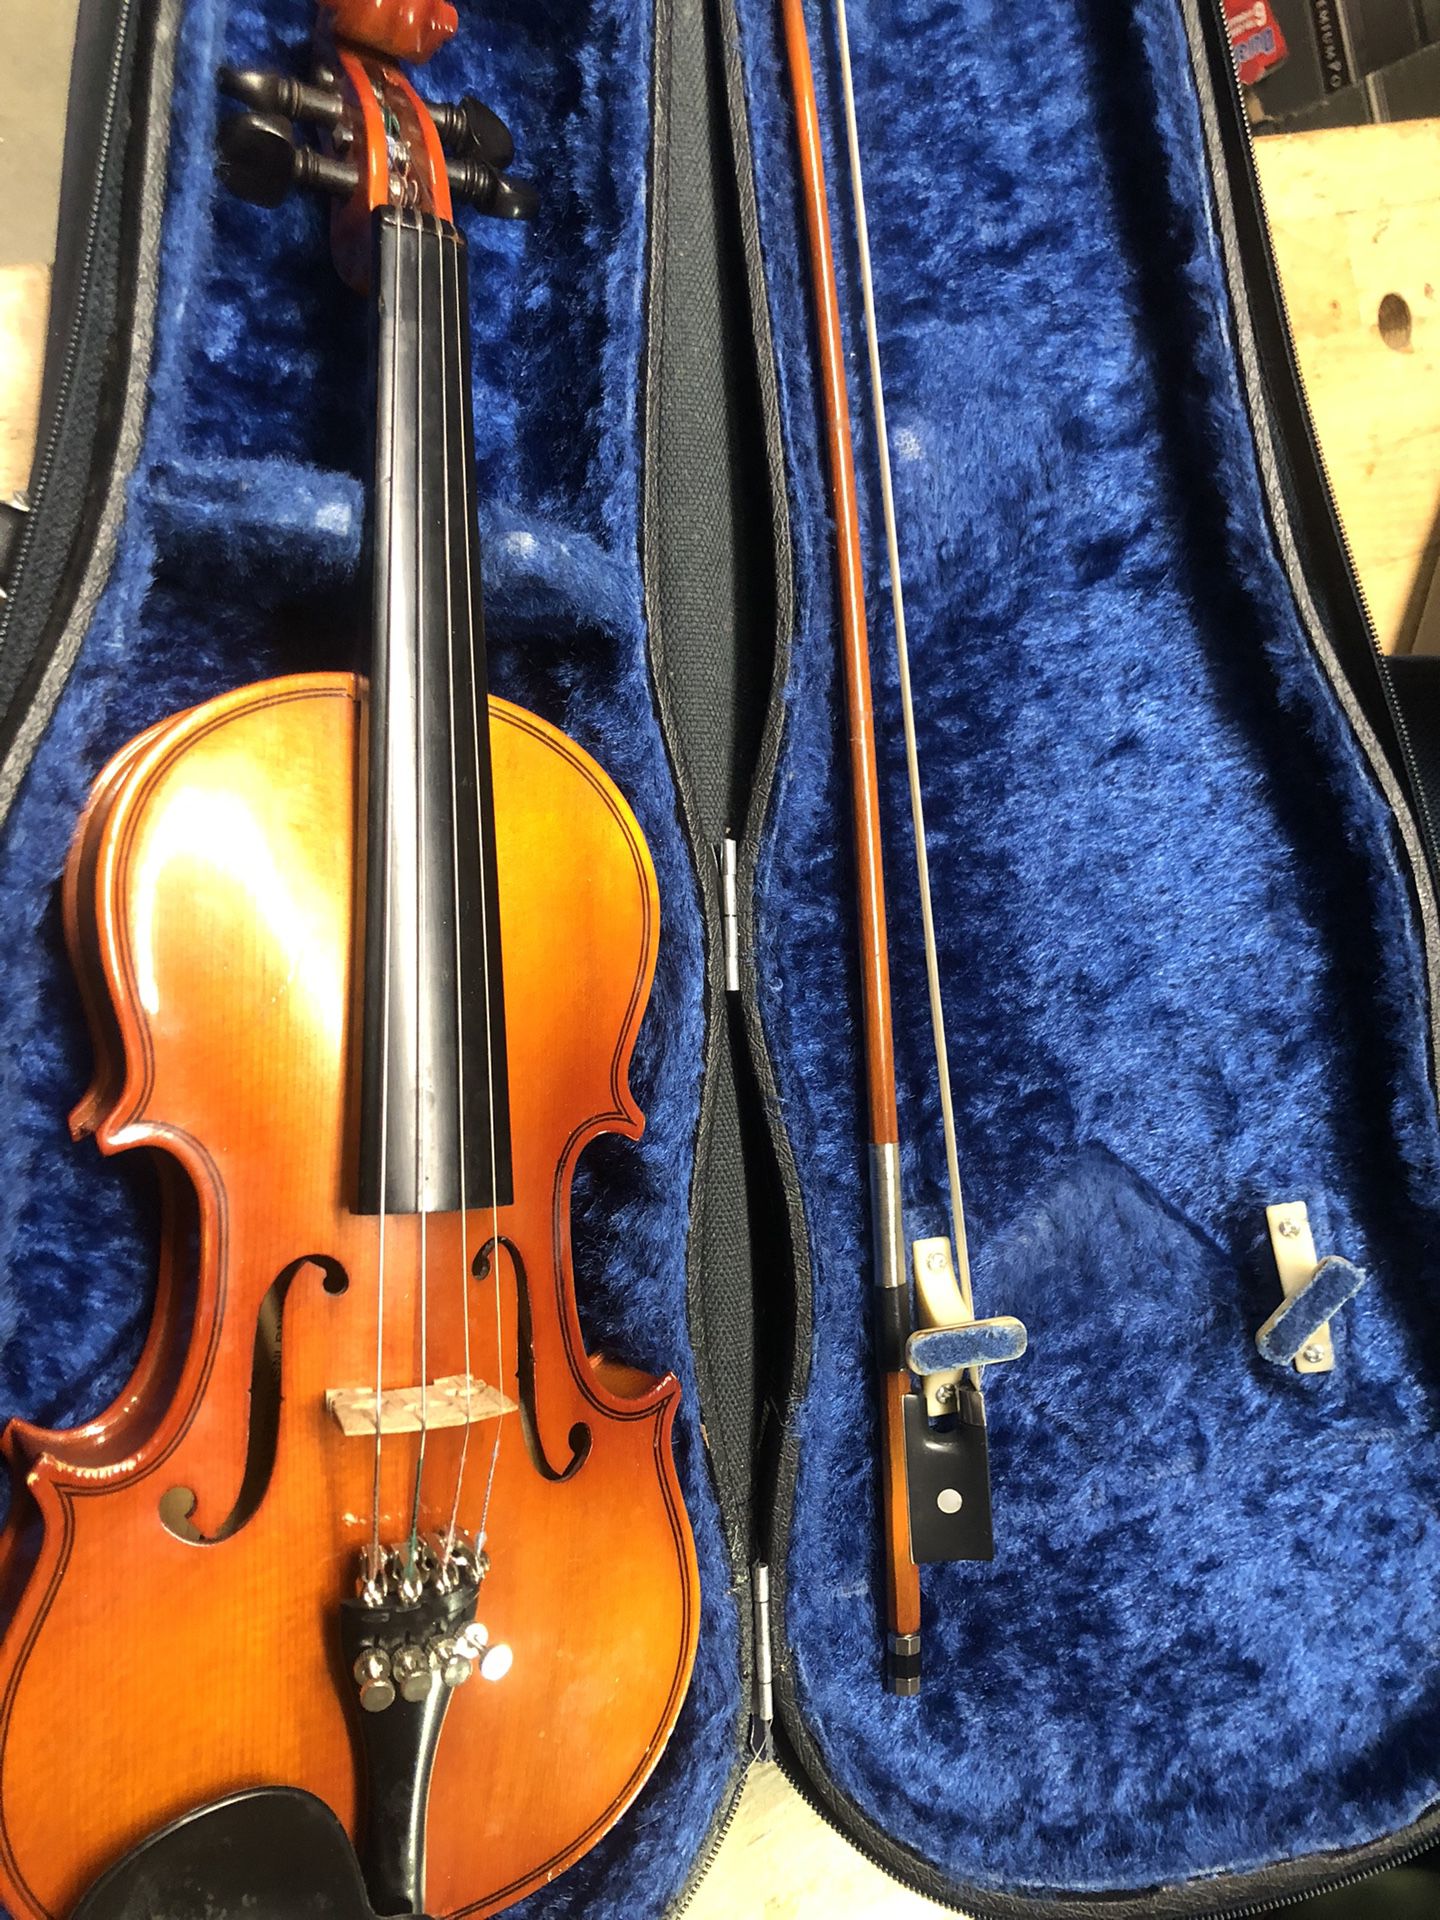 1/8 Sized Violin K. Becker, with case and bow